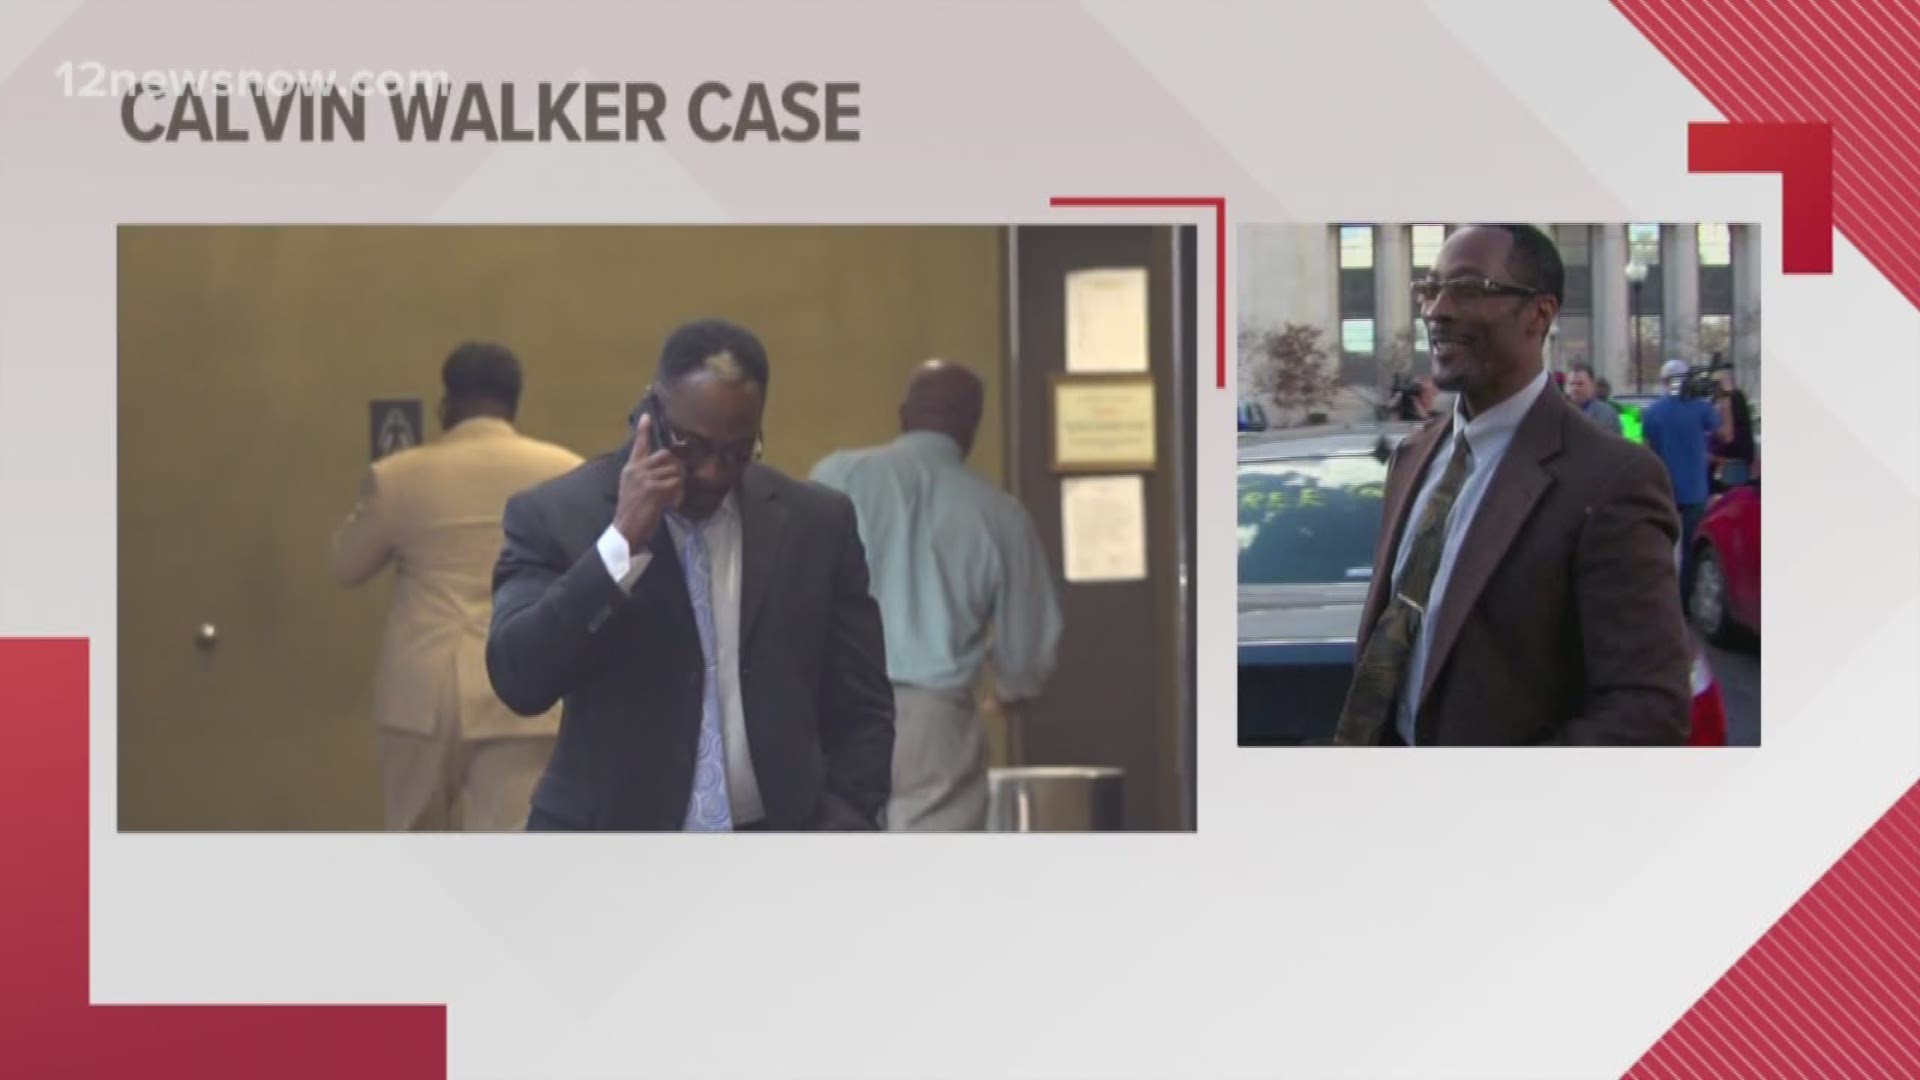 Calvin Walker was back in court today discussing the terms of his sentence. Walker was found guilty on a state charge of felony fraud on Sept. 26, 2019.